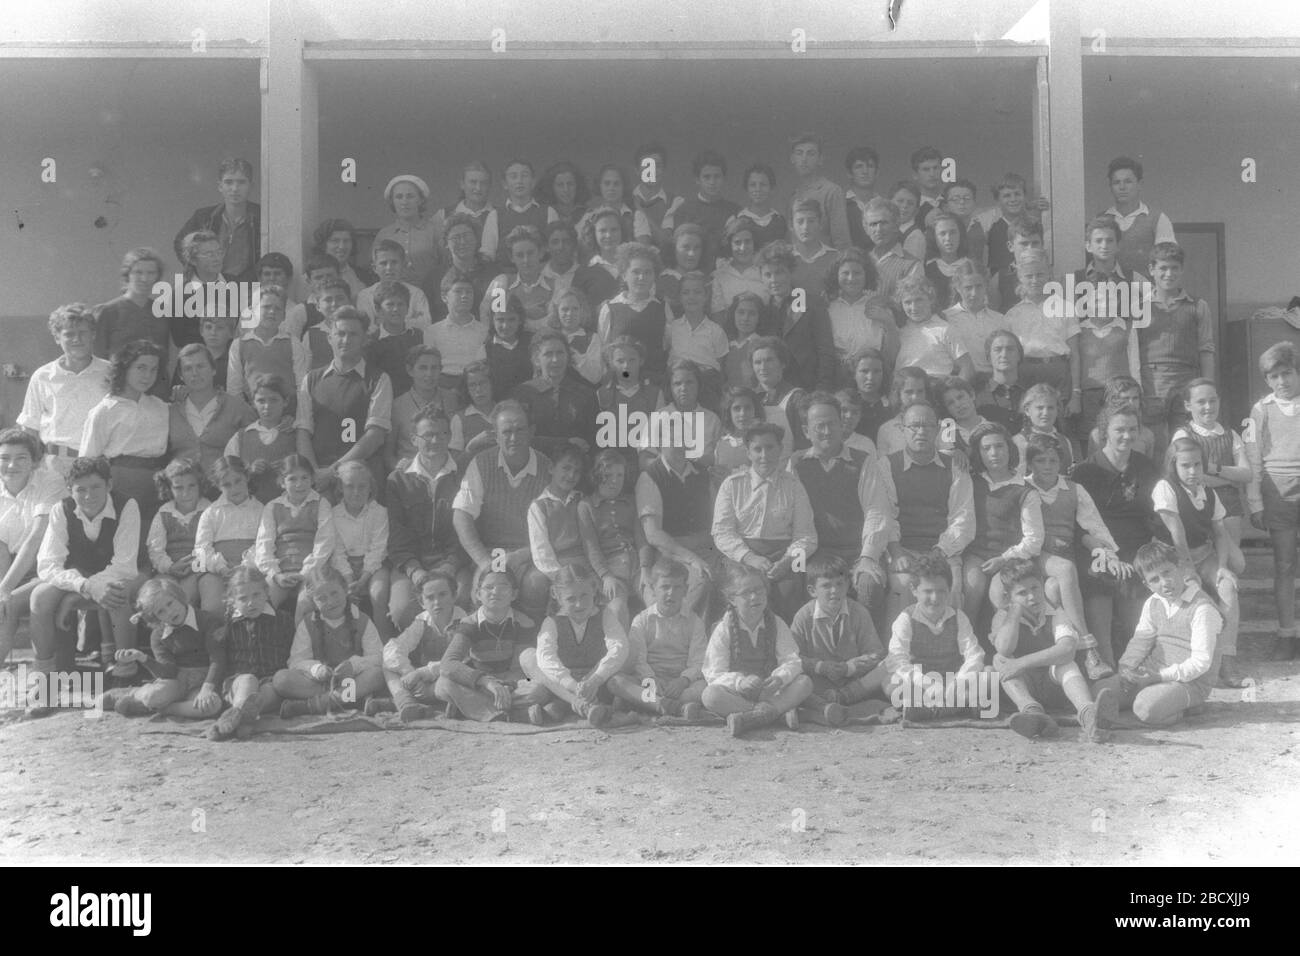 English A Group Picture Of The Teachers The Students Of Kibbutz Geva Photographed On The 25th Anniversary Of The Settlement U I I Ss E I O C U I U I O U I I U U O I O U E Ss O E I I E